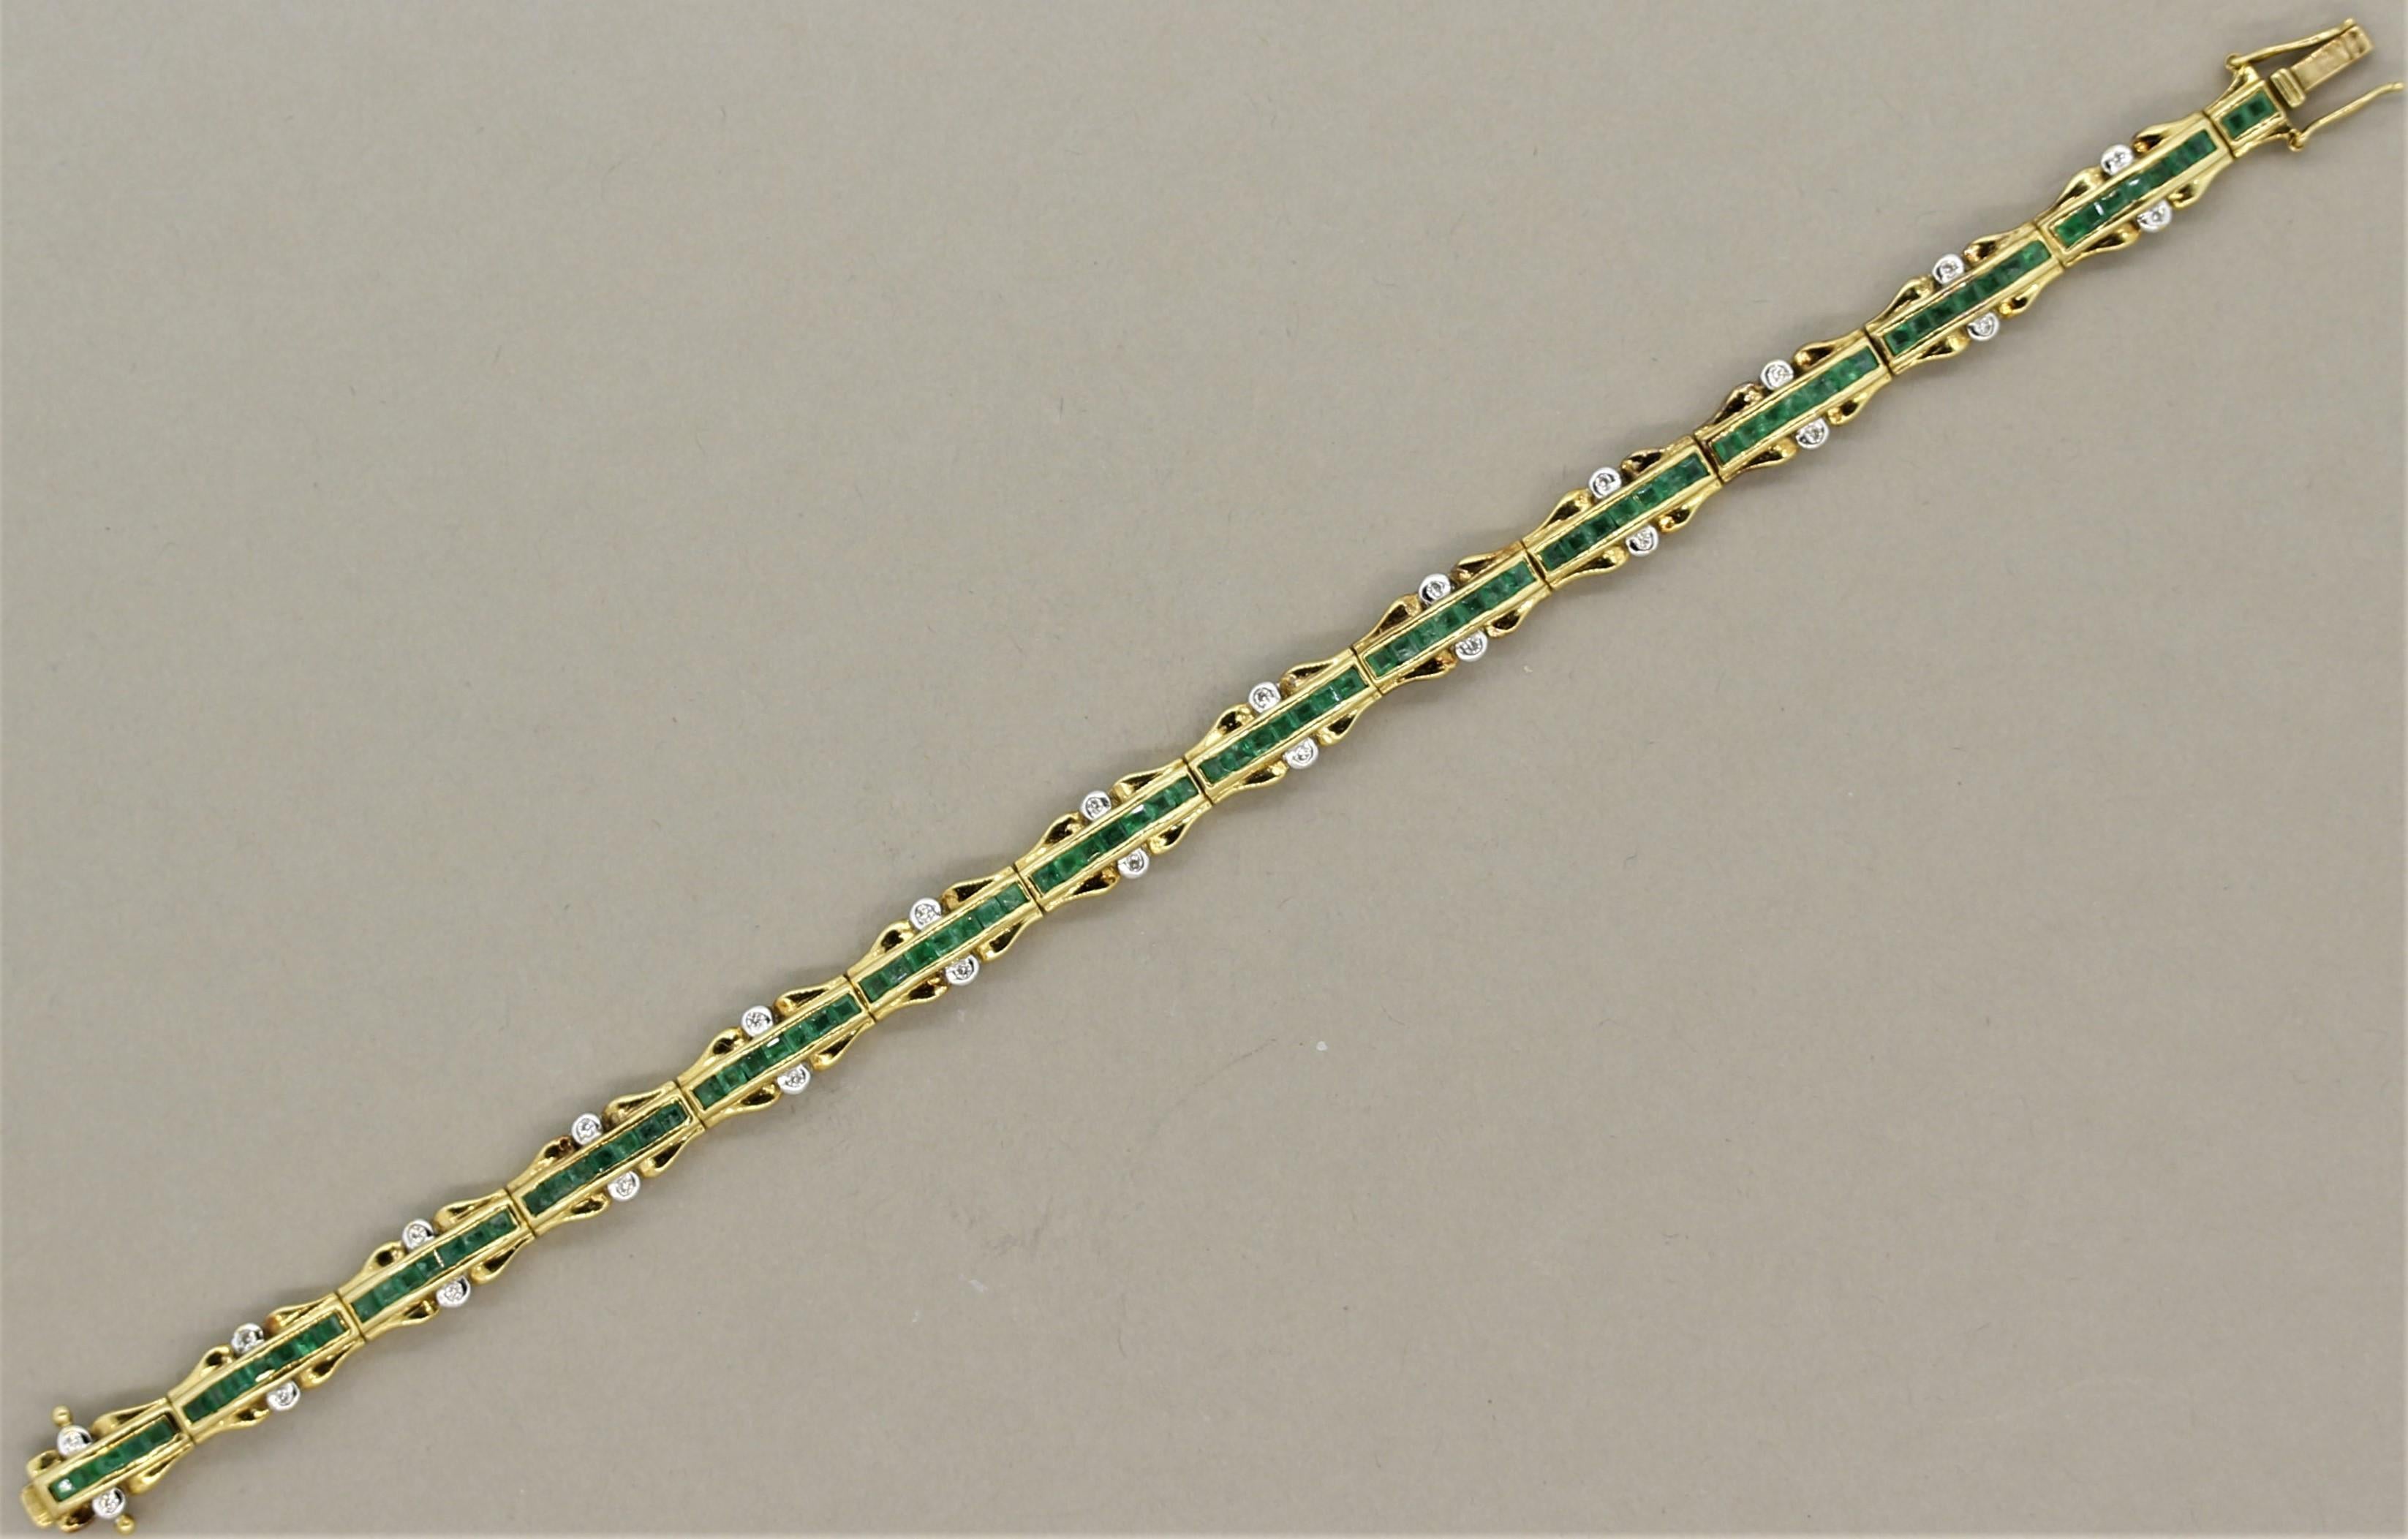 A sweet and stylish gold bracelet featuring approximately 5.00 carats of square shaped emeralds and round brilliant cut diamonds. The emeralds are channel set in the center of the links and accented by 2 bezel set diamonds. Made in 18k yellow gold